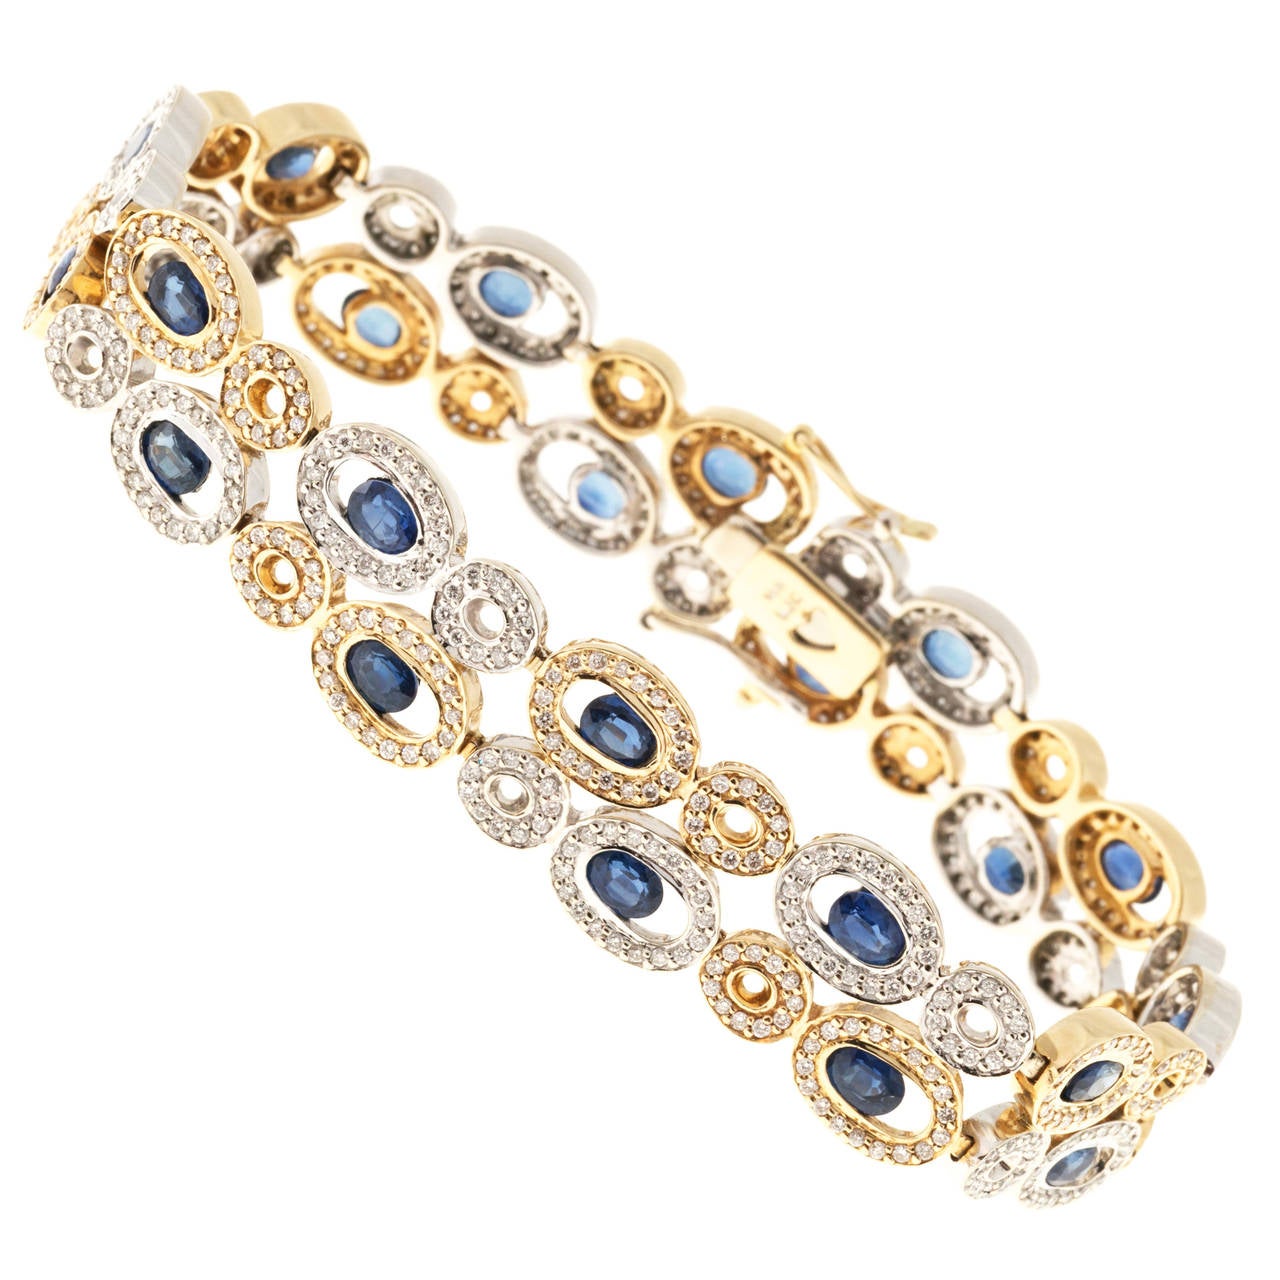 Sapphire and diamond gold link bracelet. 24 cornflower blue oval sapphires each with a halo of full cut diamonds. 14k yellow and white gold alternating links. Designer BJC. Hidden box catch double side lock safety. 7.5 inches in length. 

24 genuine